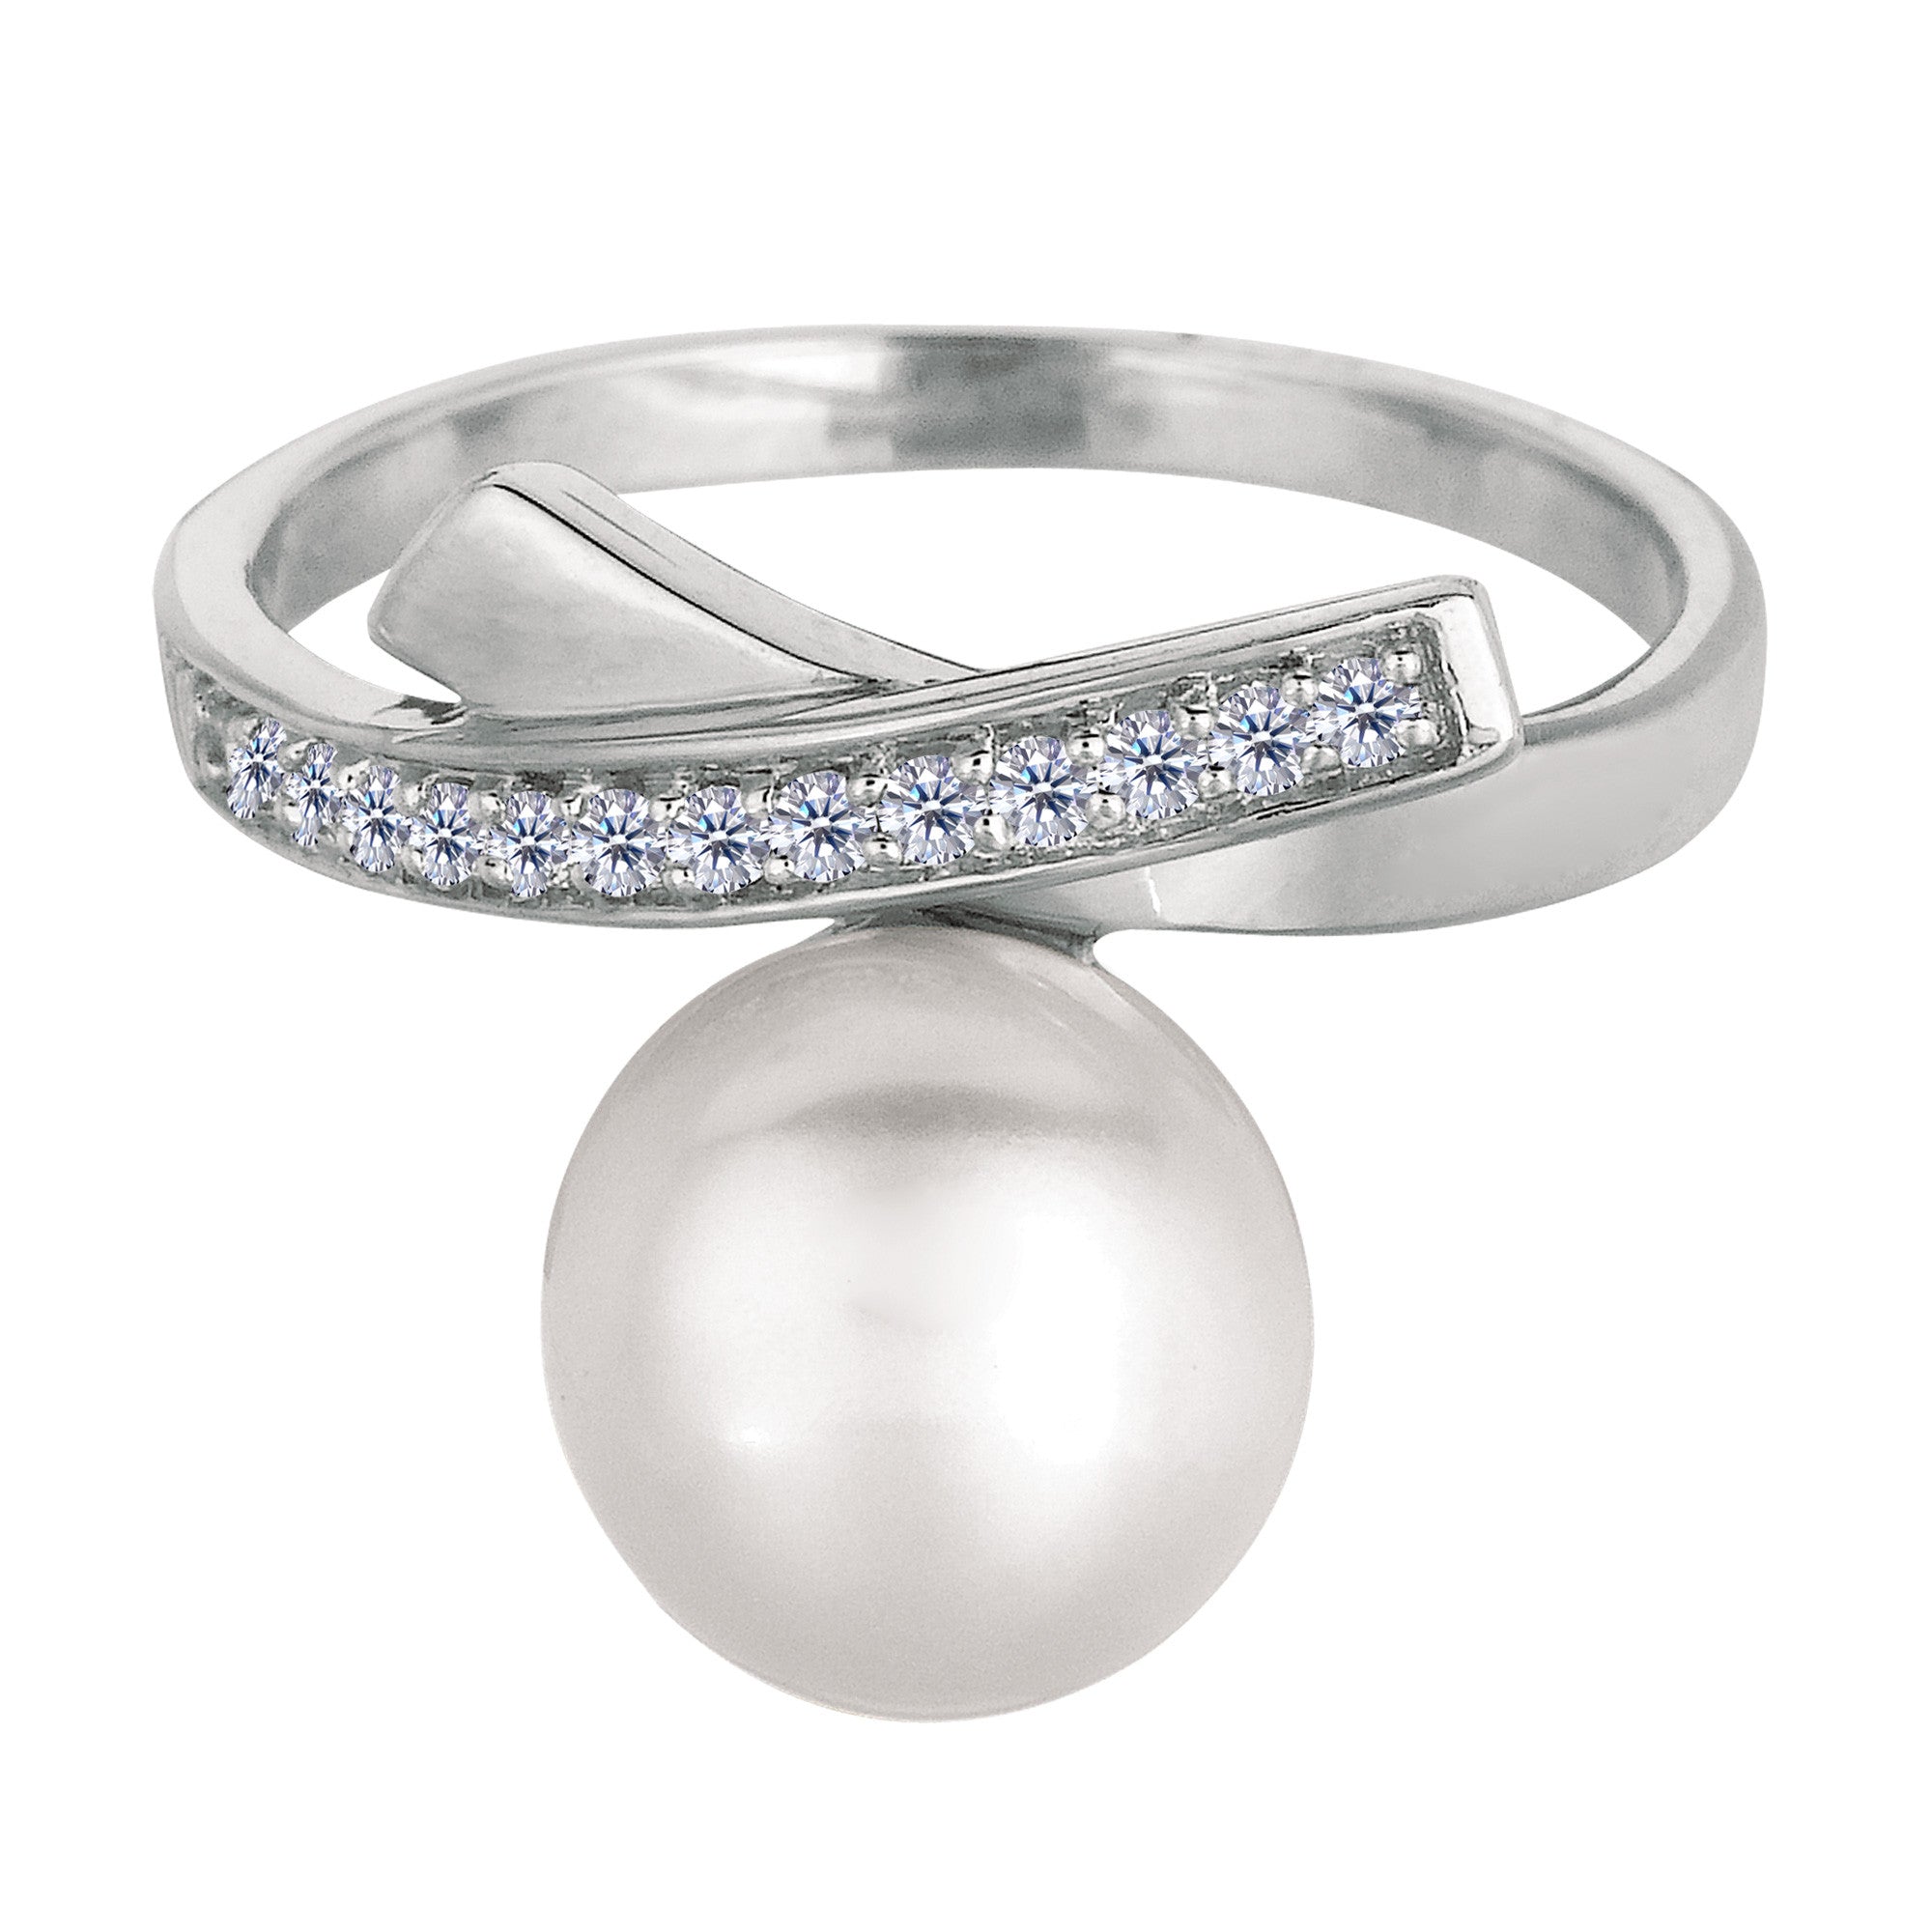 Sterling Silver With Rhodium Finish Cross Over Design Pearl And Cubic Zirconia Ring fine designer jewelry for men and women